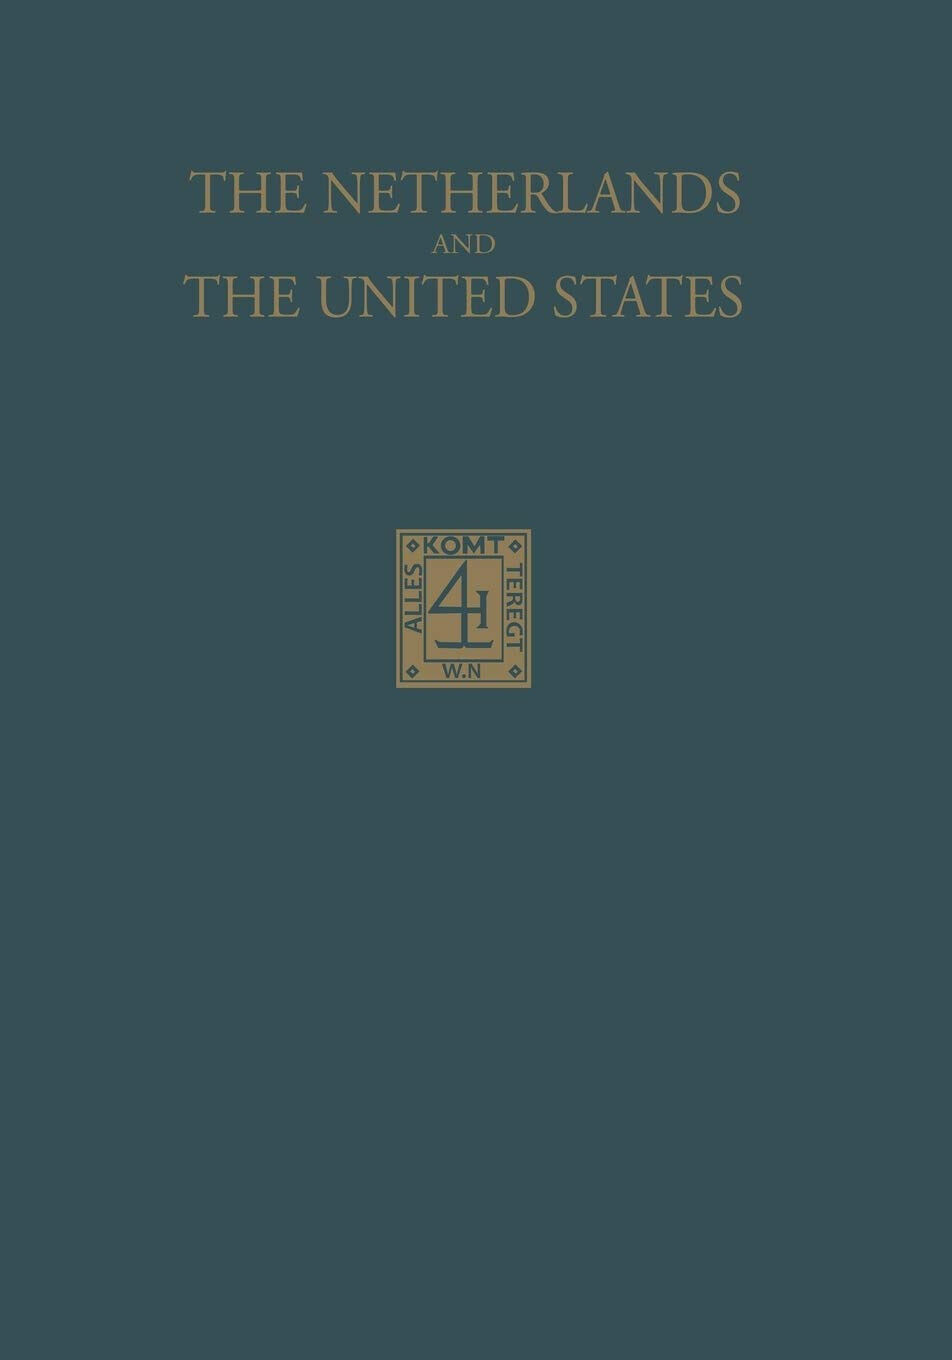 The Netherlands and the United States - J. C. Westermann - Springer, 1935